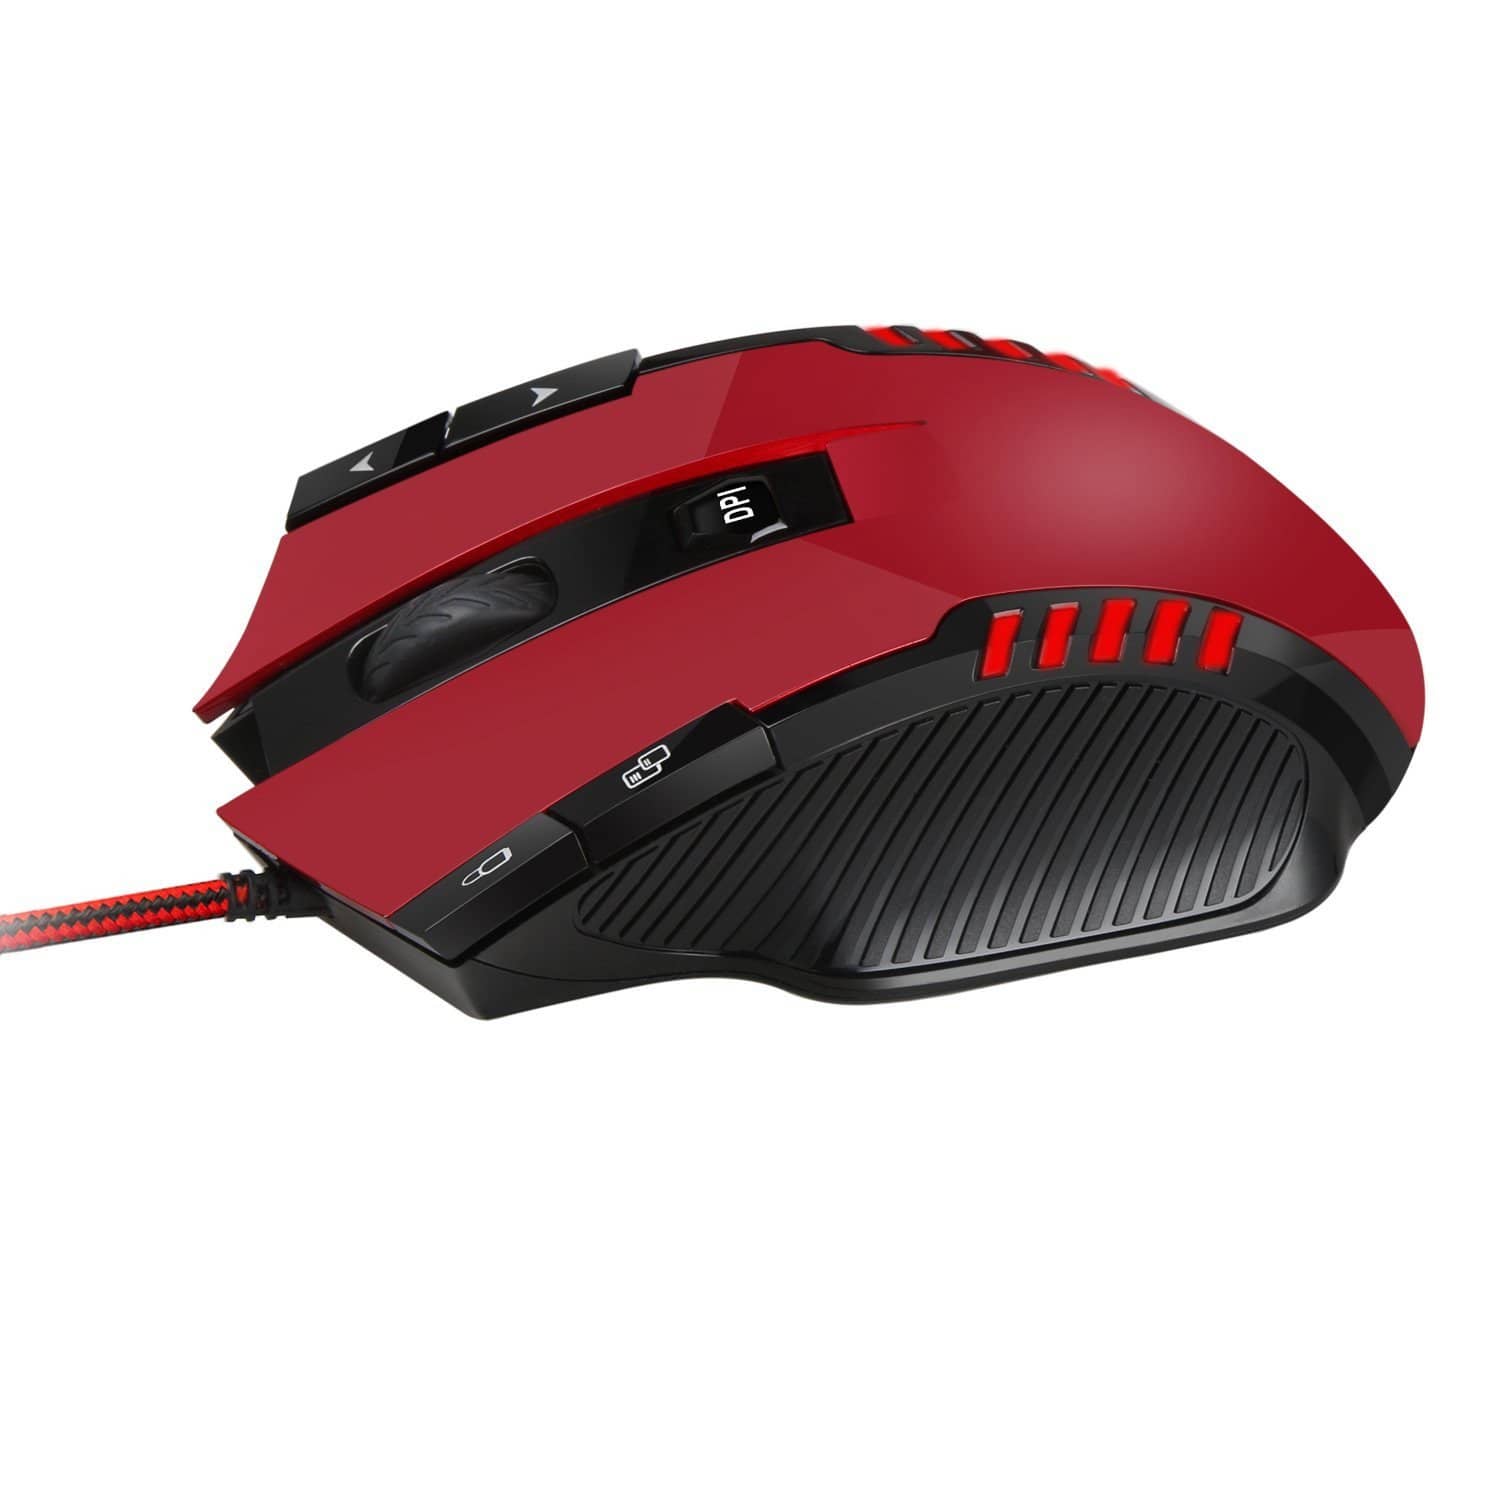 TeckNet Gaming Mouse High Precision Programmable Mouse - Red